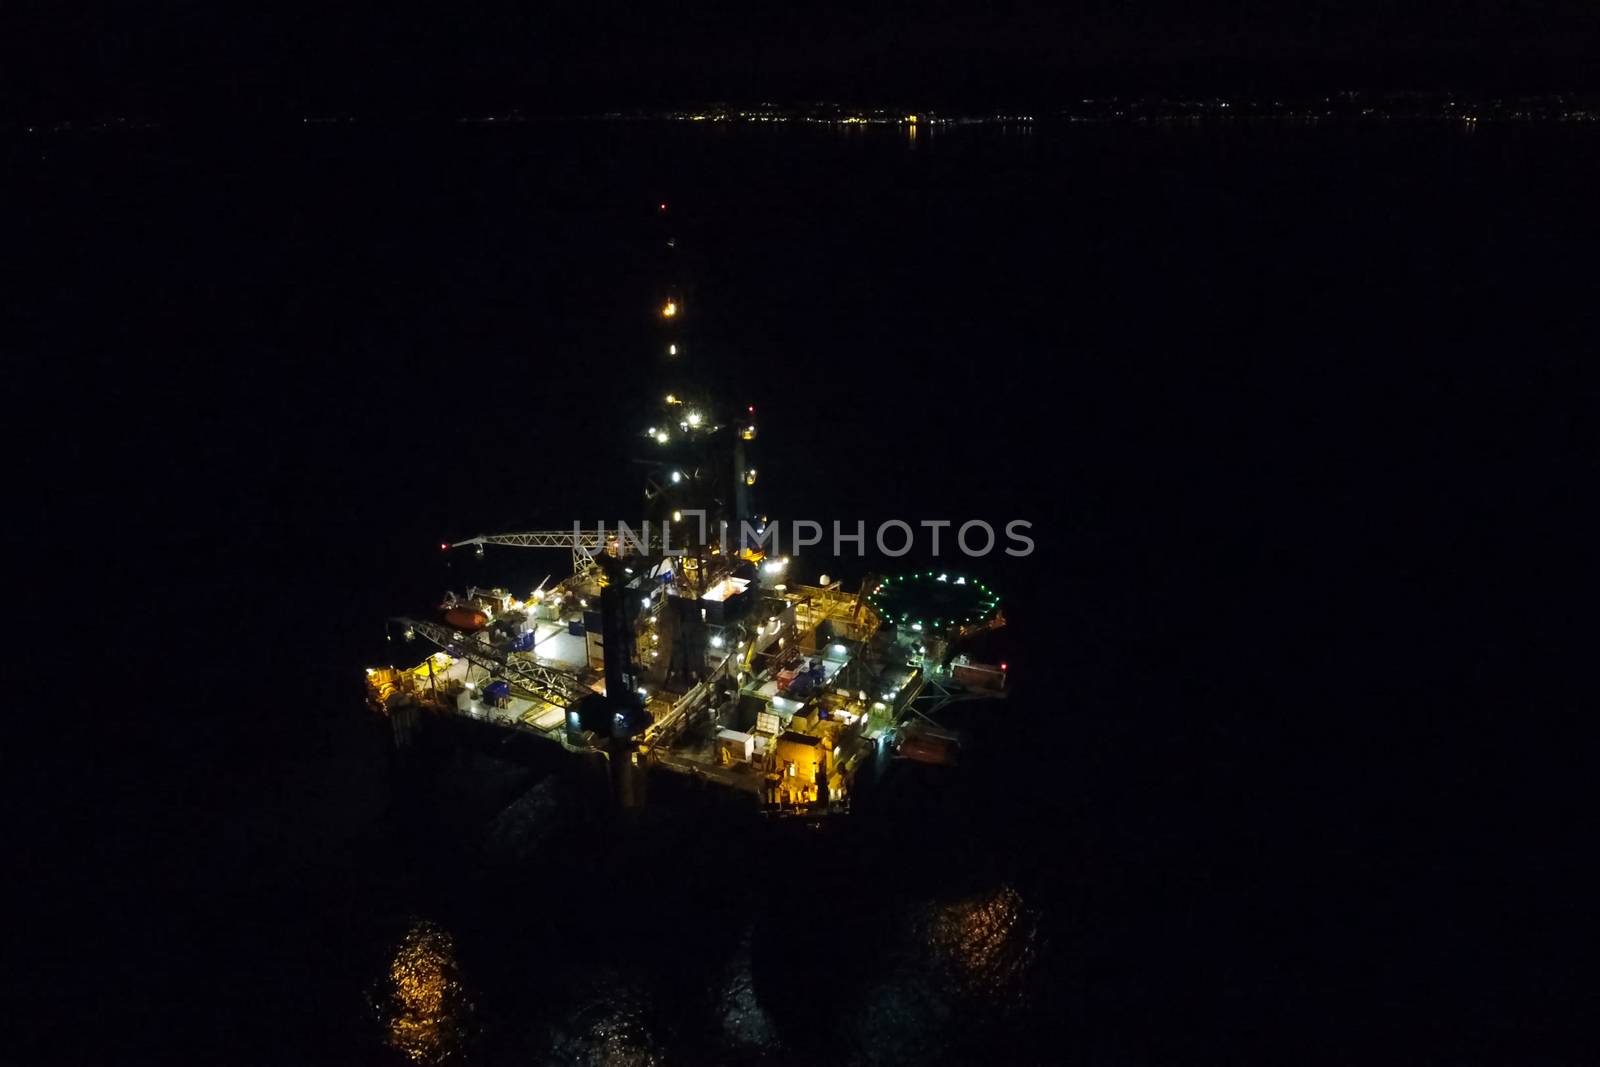 Drilling platform in the port. Oil platform at night in the light of its own lighting. Towing of the oil platform.